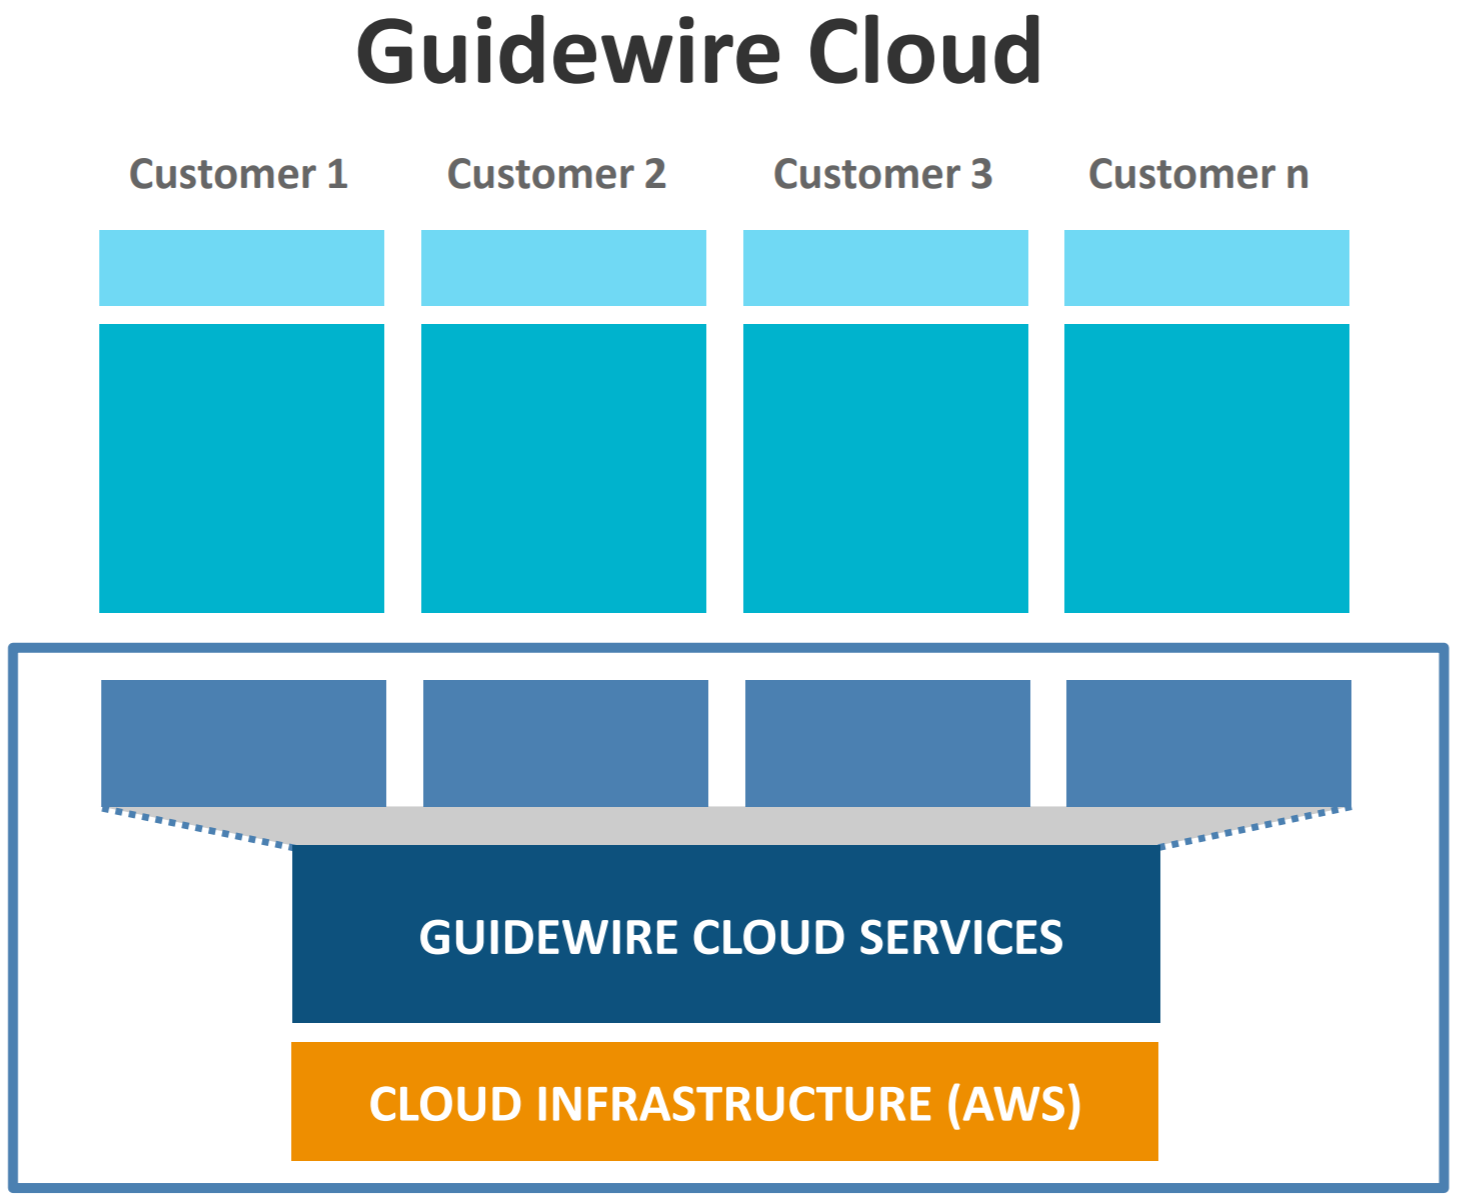 The Customer Value Proposition of the Cloud